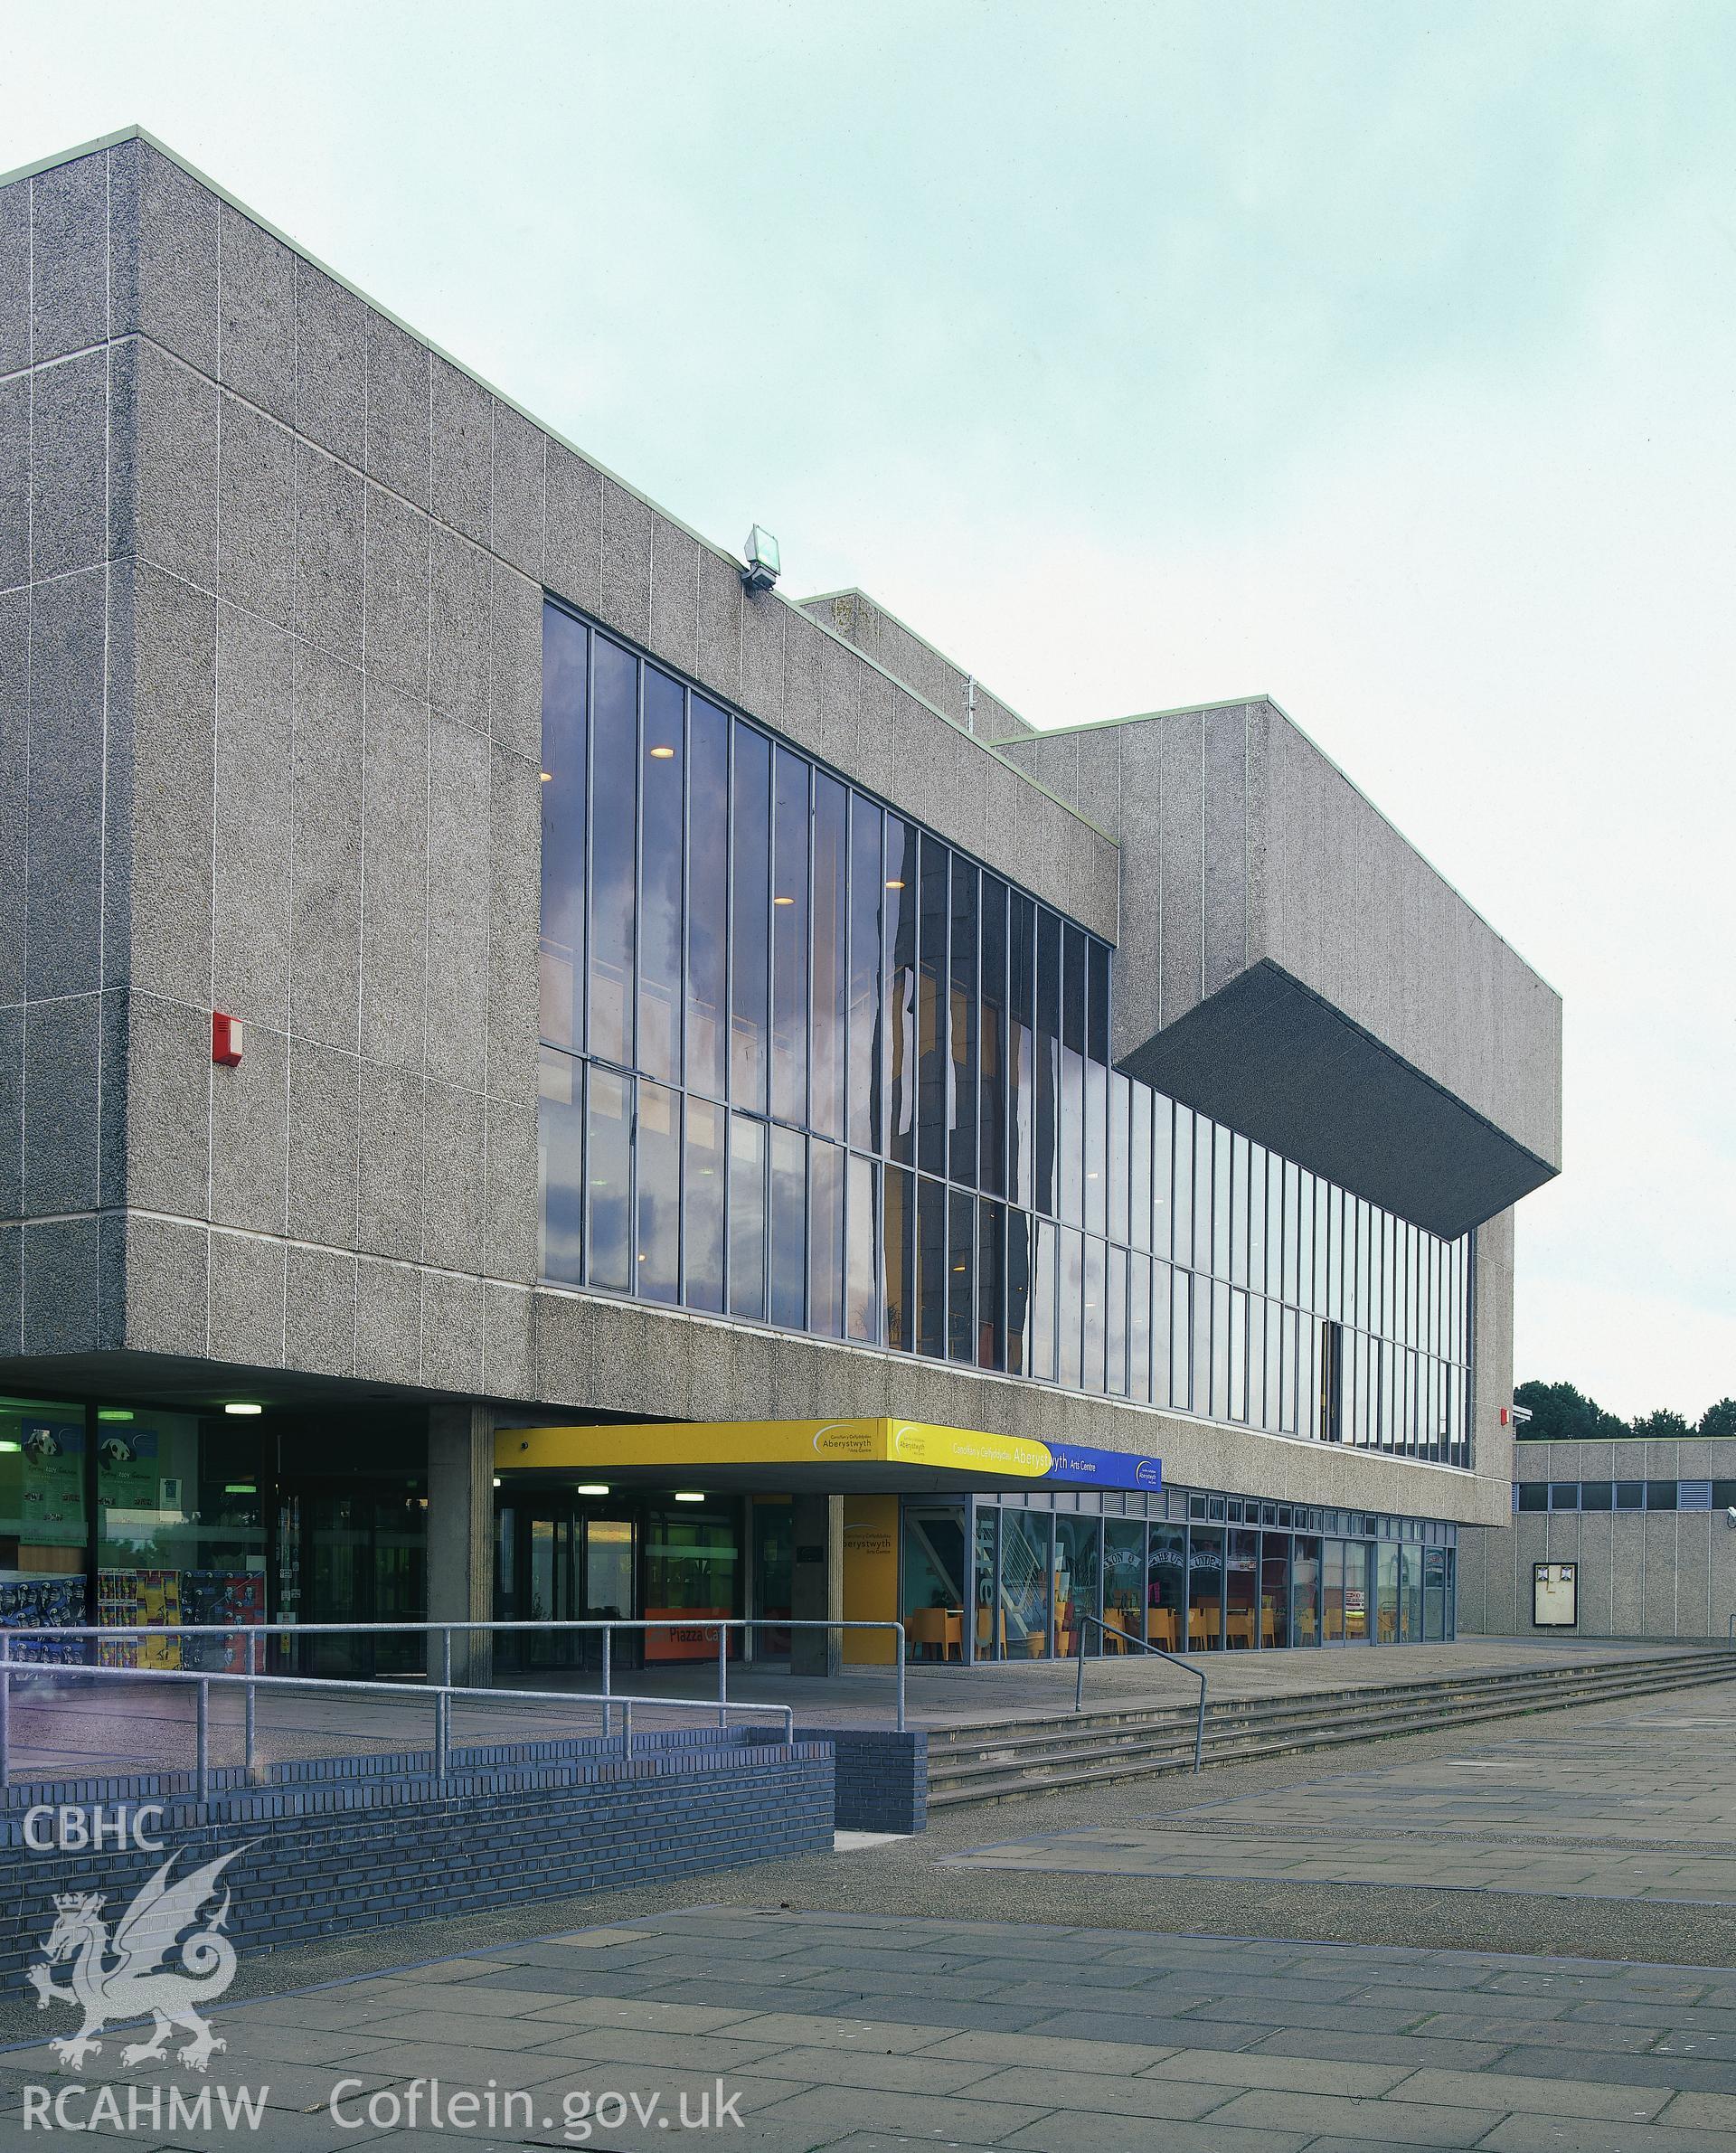 RCAHMW colour transparency showing view of Aberystwyth Arts Centre.